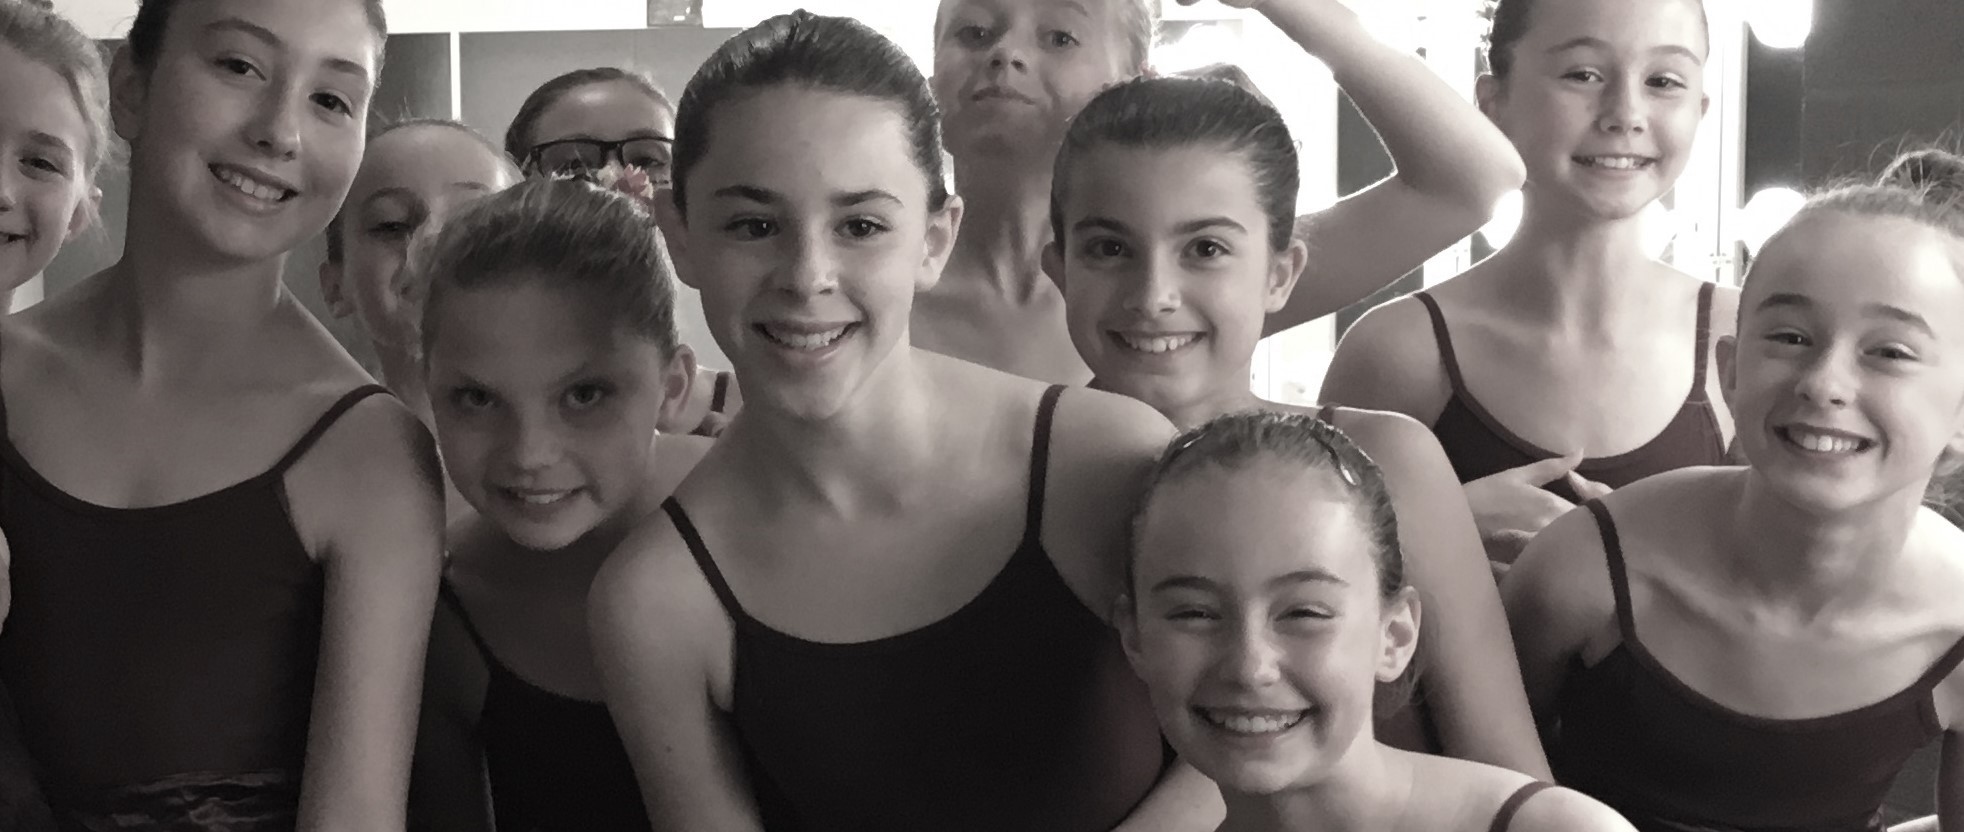 Ballet dancers excited before performance